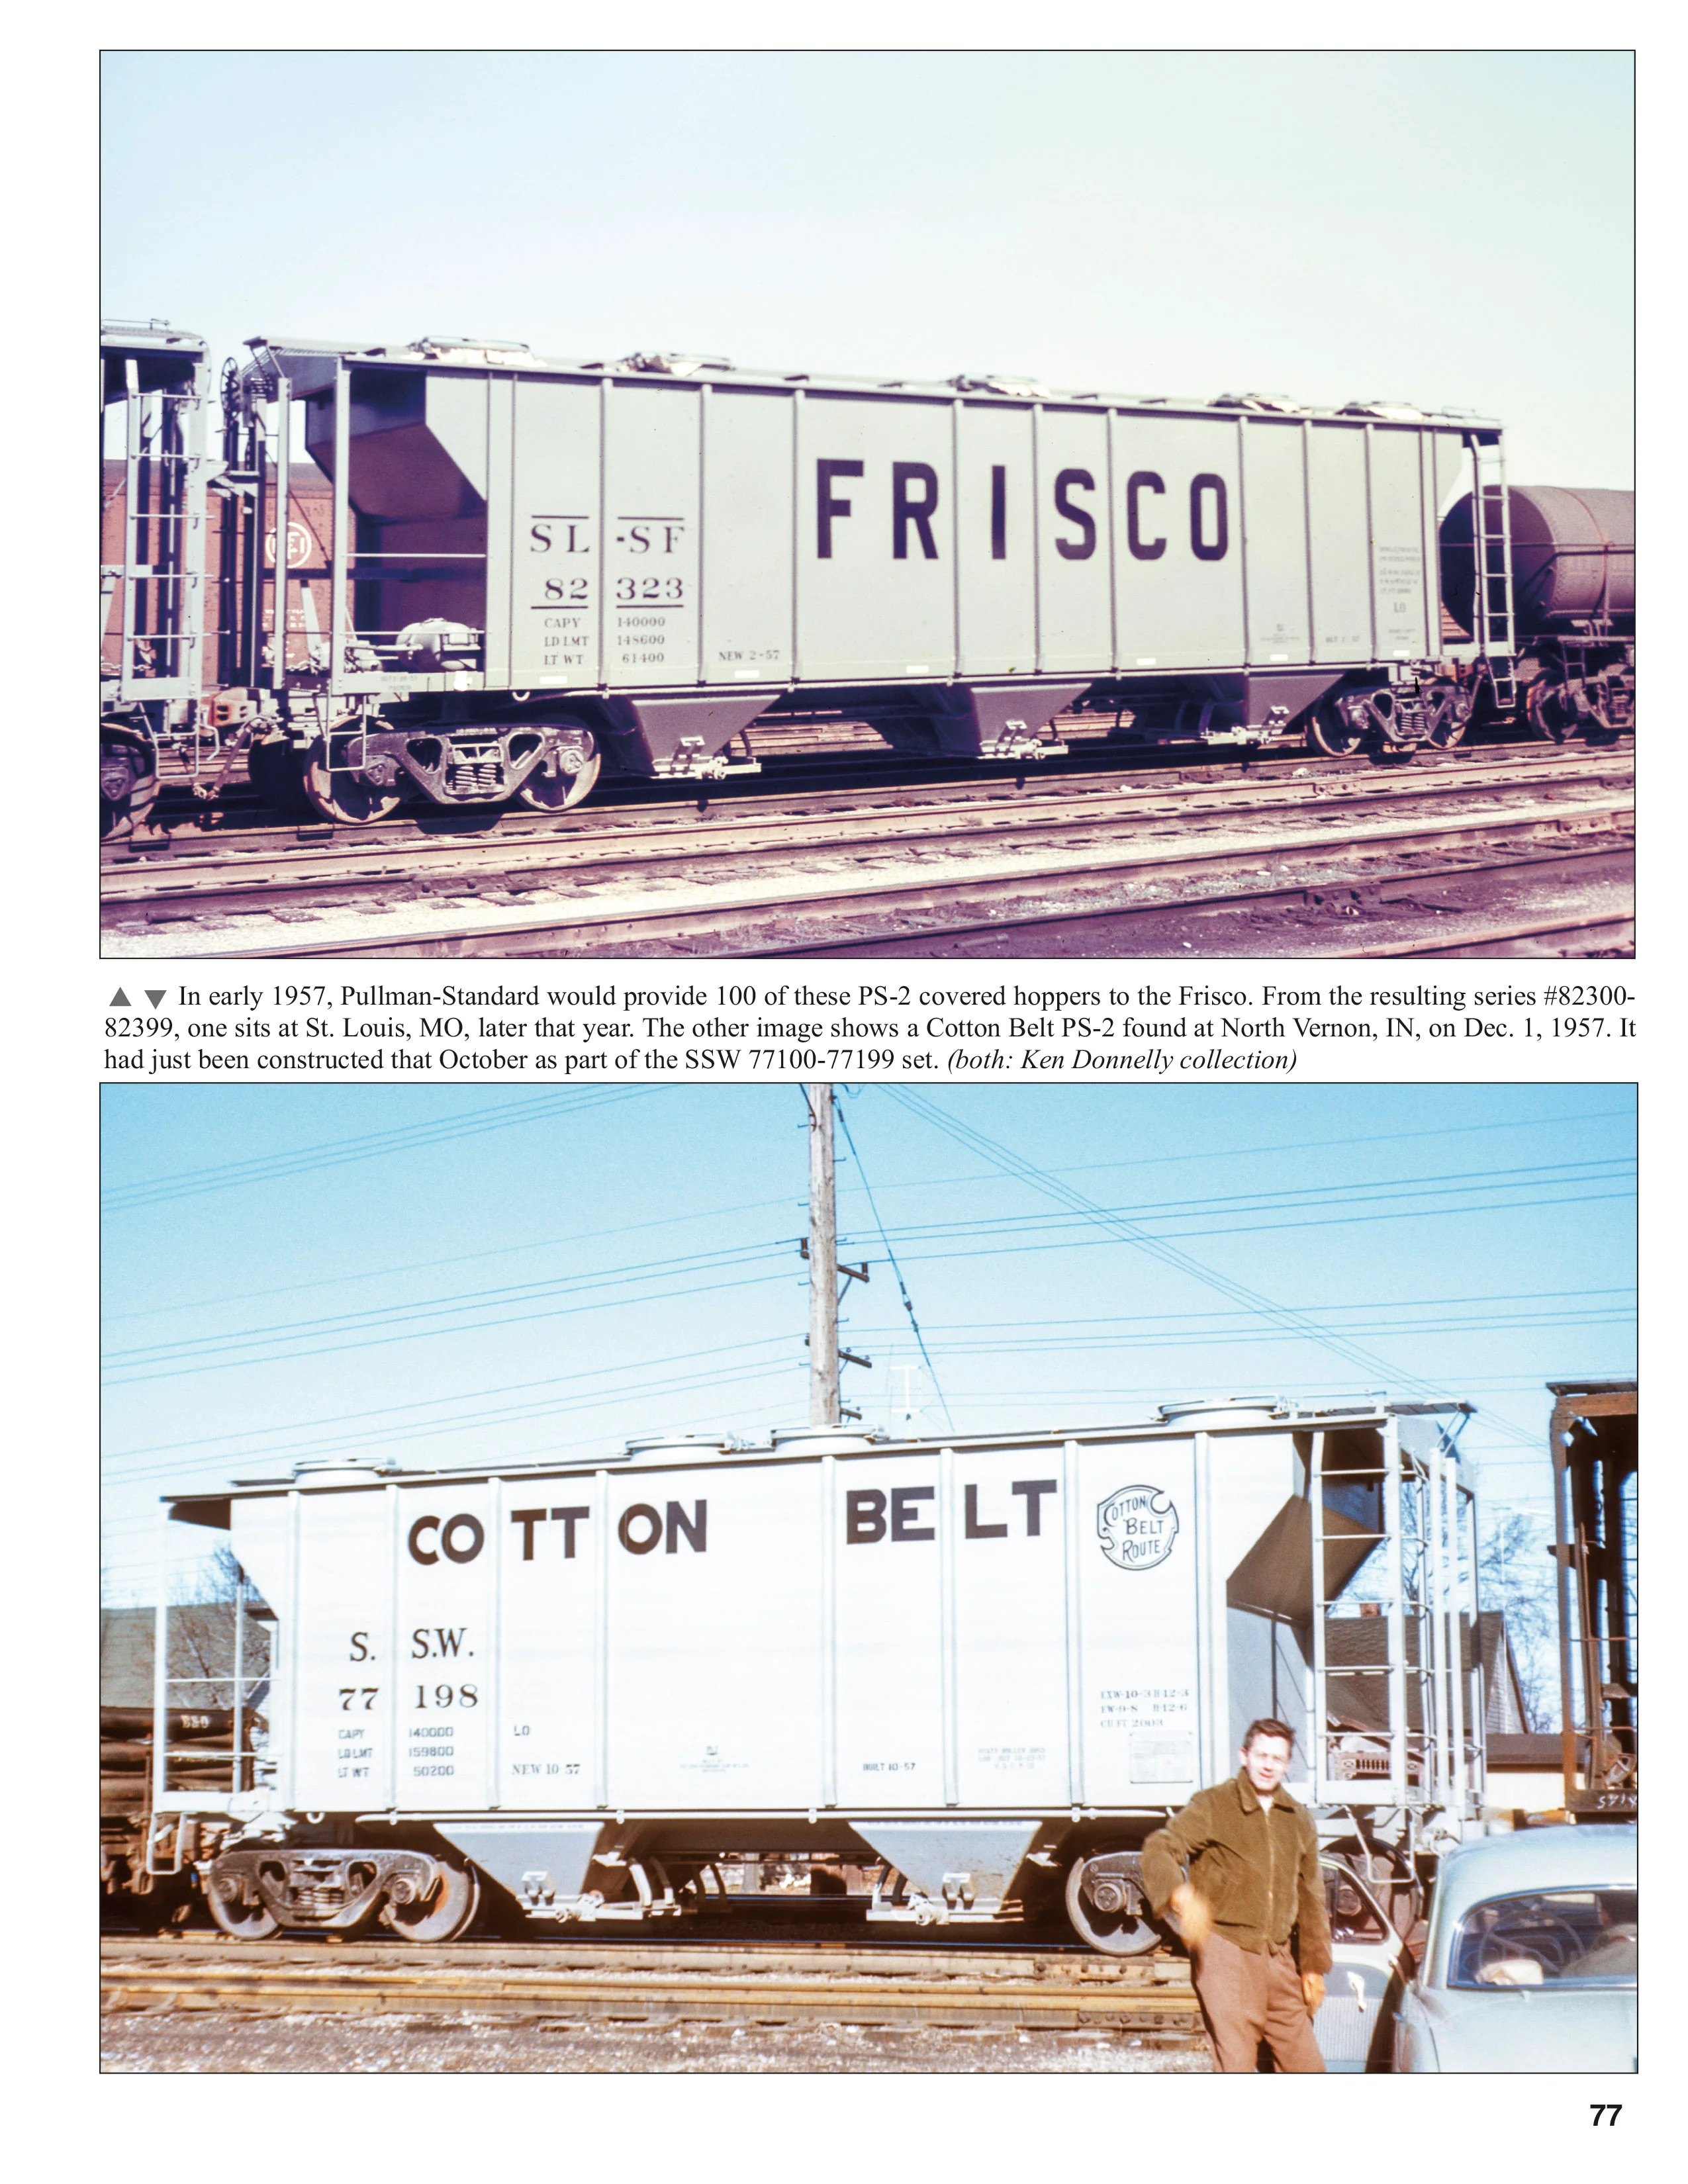 Morning Sun Books 1771 1950s Freight Car Color Guide Volume 2: Boxcars, Covered & Open Hoppers, Flatcars, & Gondolas